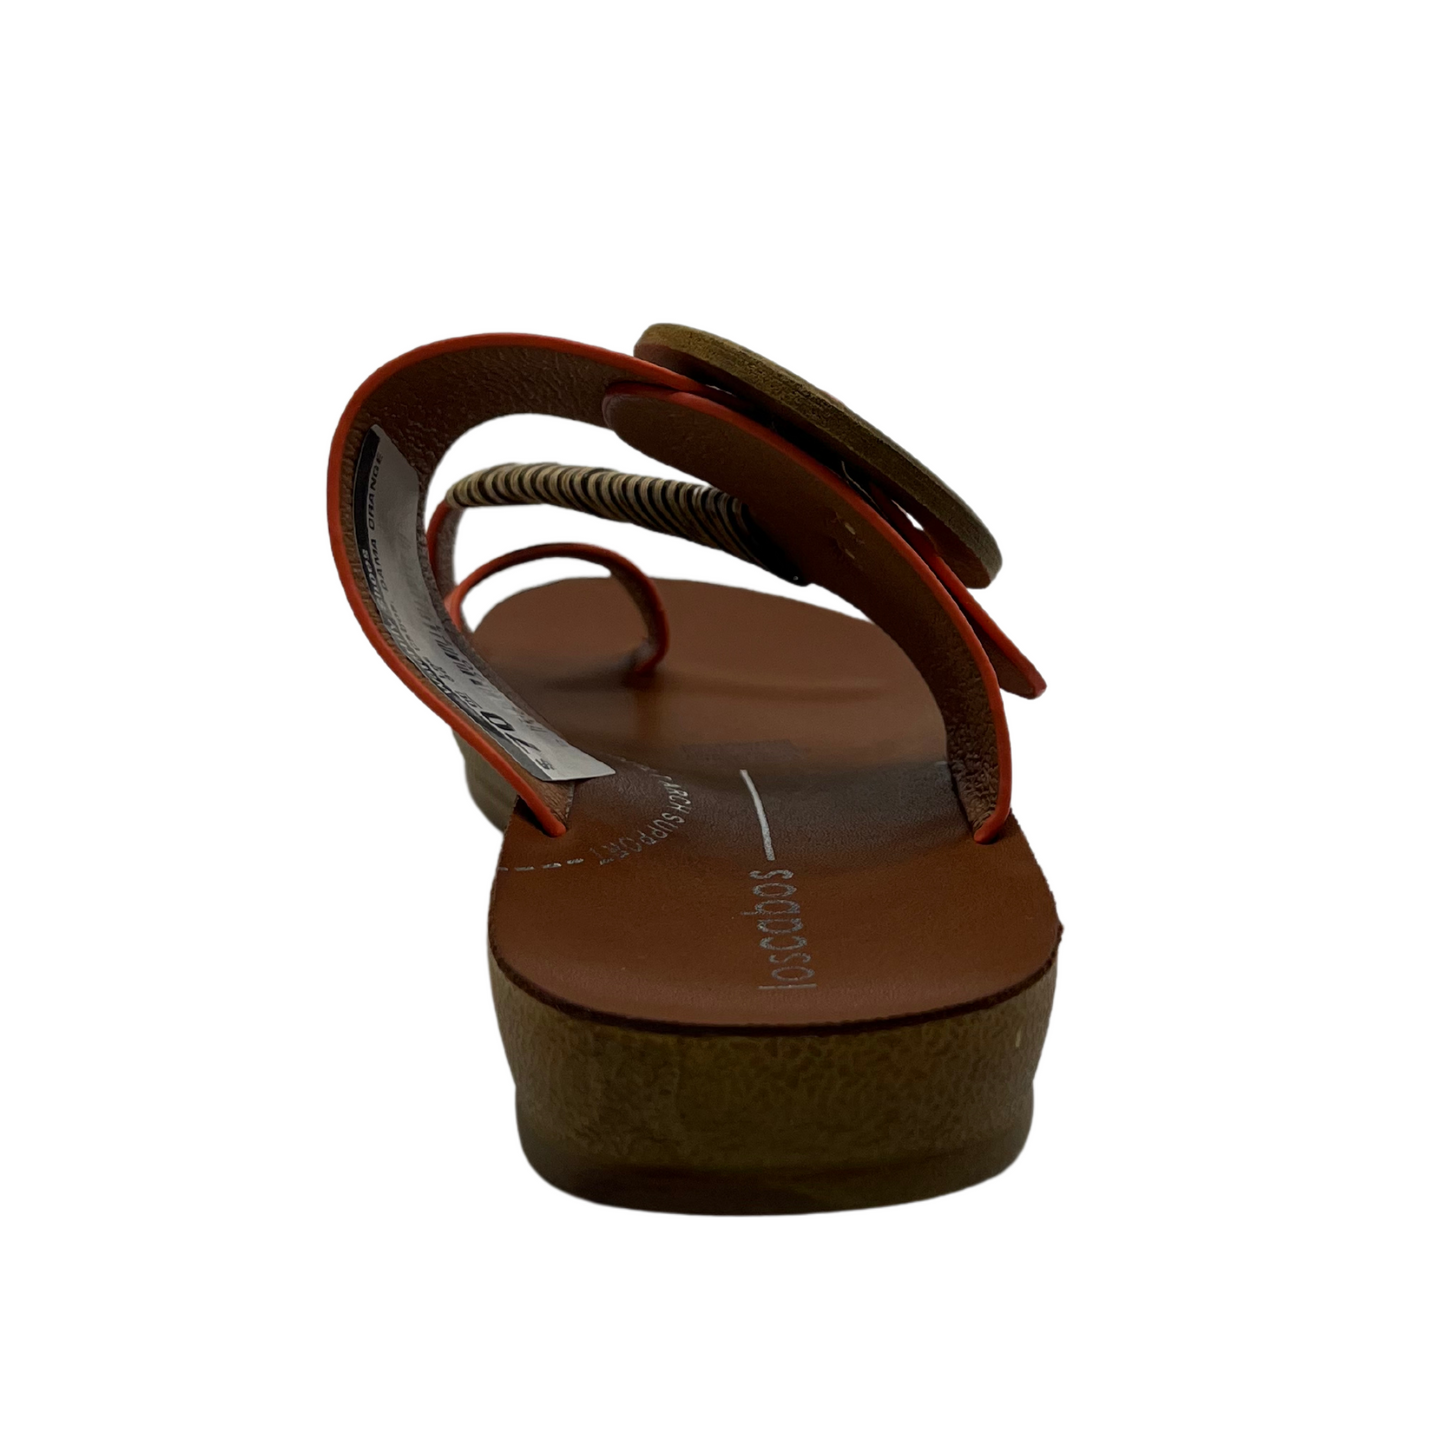 Back view of orange strapped slip on sandal. Featuring a wooden buckle and bamboo wrap on the toe strap.